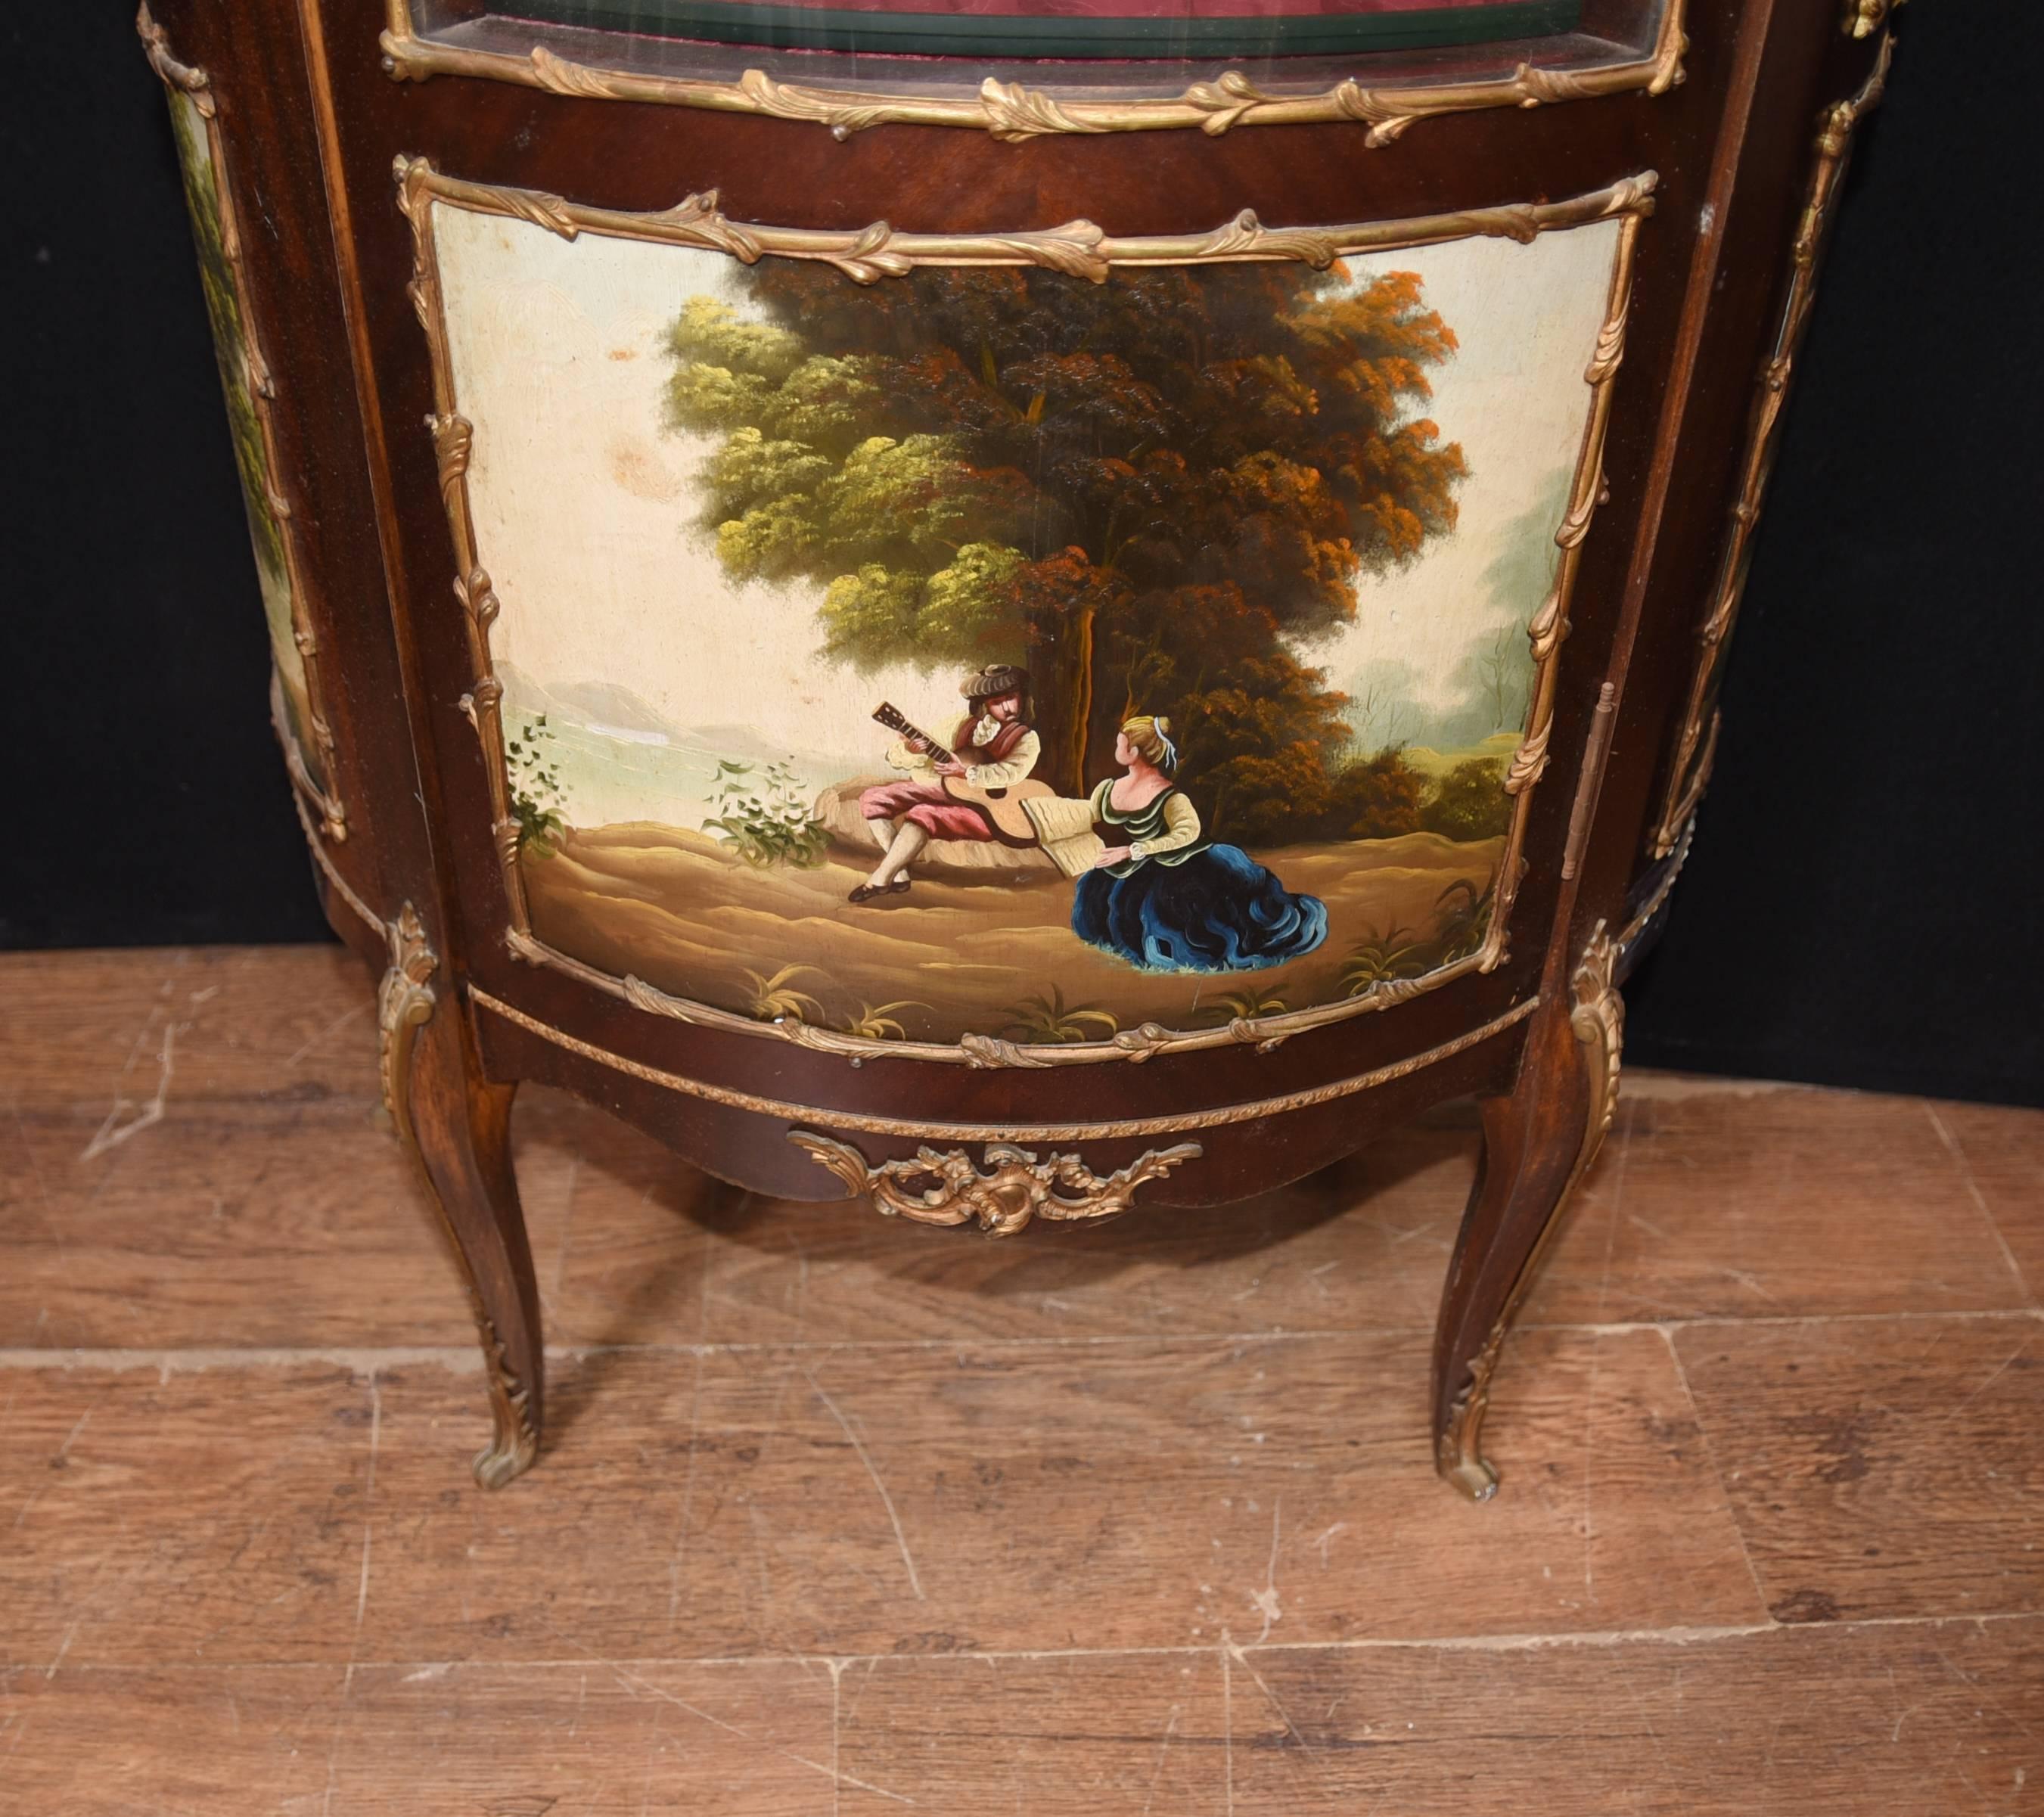 Gorgeous French antique display cabinet with Vernis Martin style painted plaques
Main cabinet crafted from kingwood with ormolu fixtures
Painted plaques show various Romantic scenes
Purchased from a dealer on Rue De Rossiers at Paris antiques